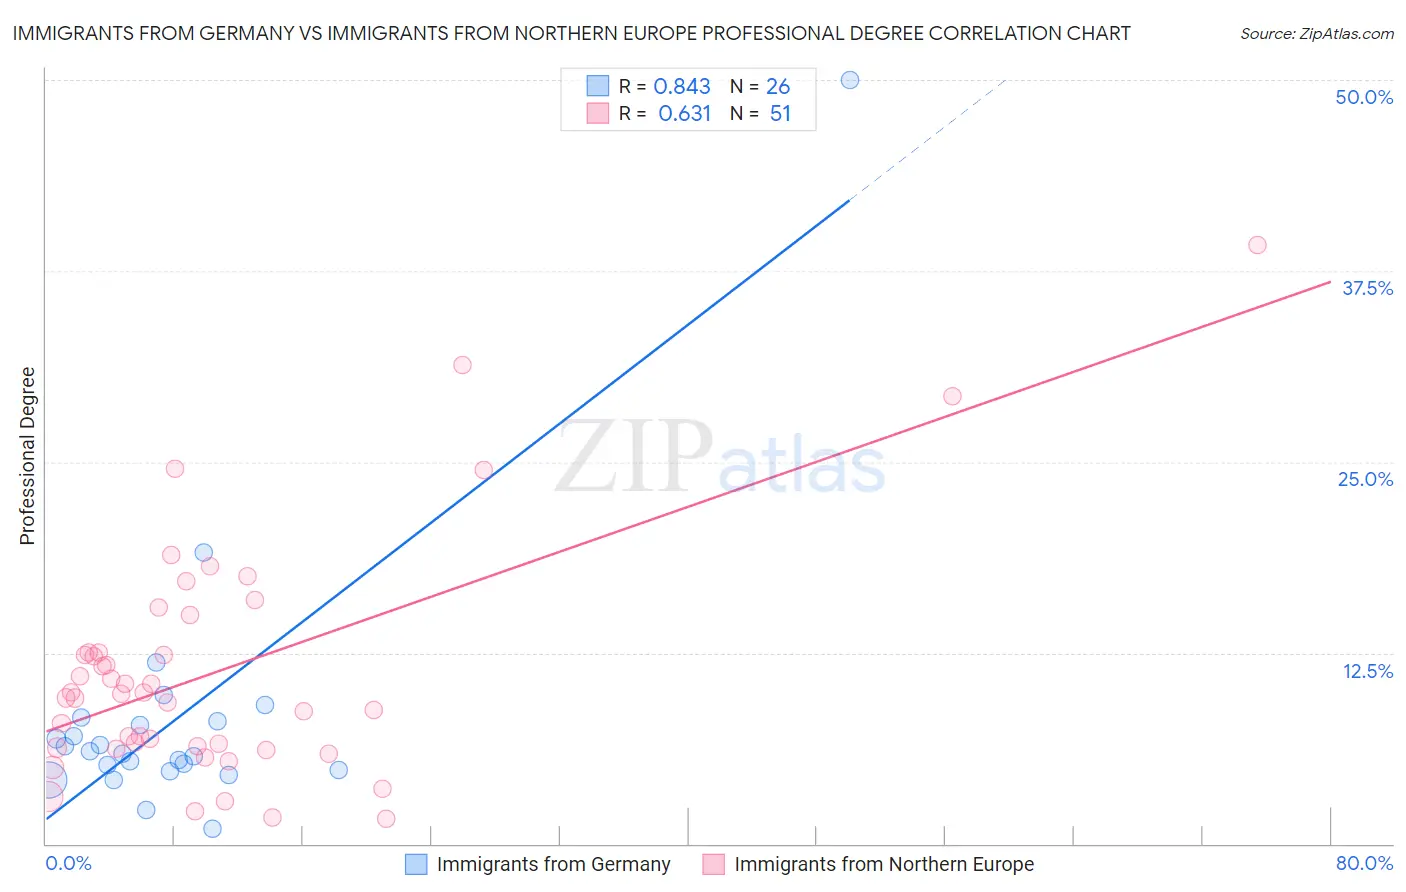 Immigrants from Germany vs Immigrants from Northern Europe Professional Degree